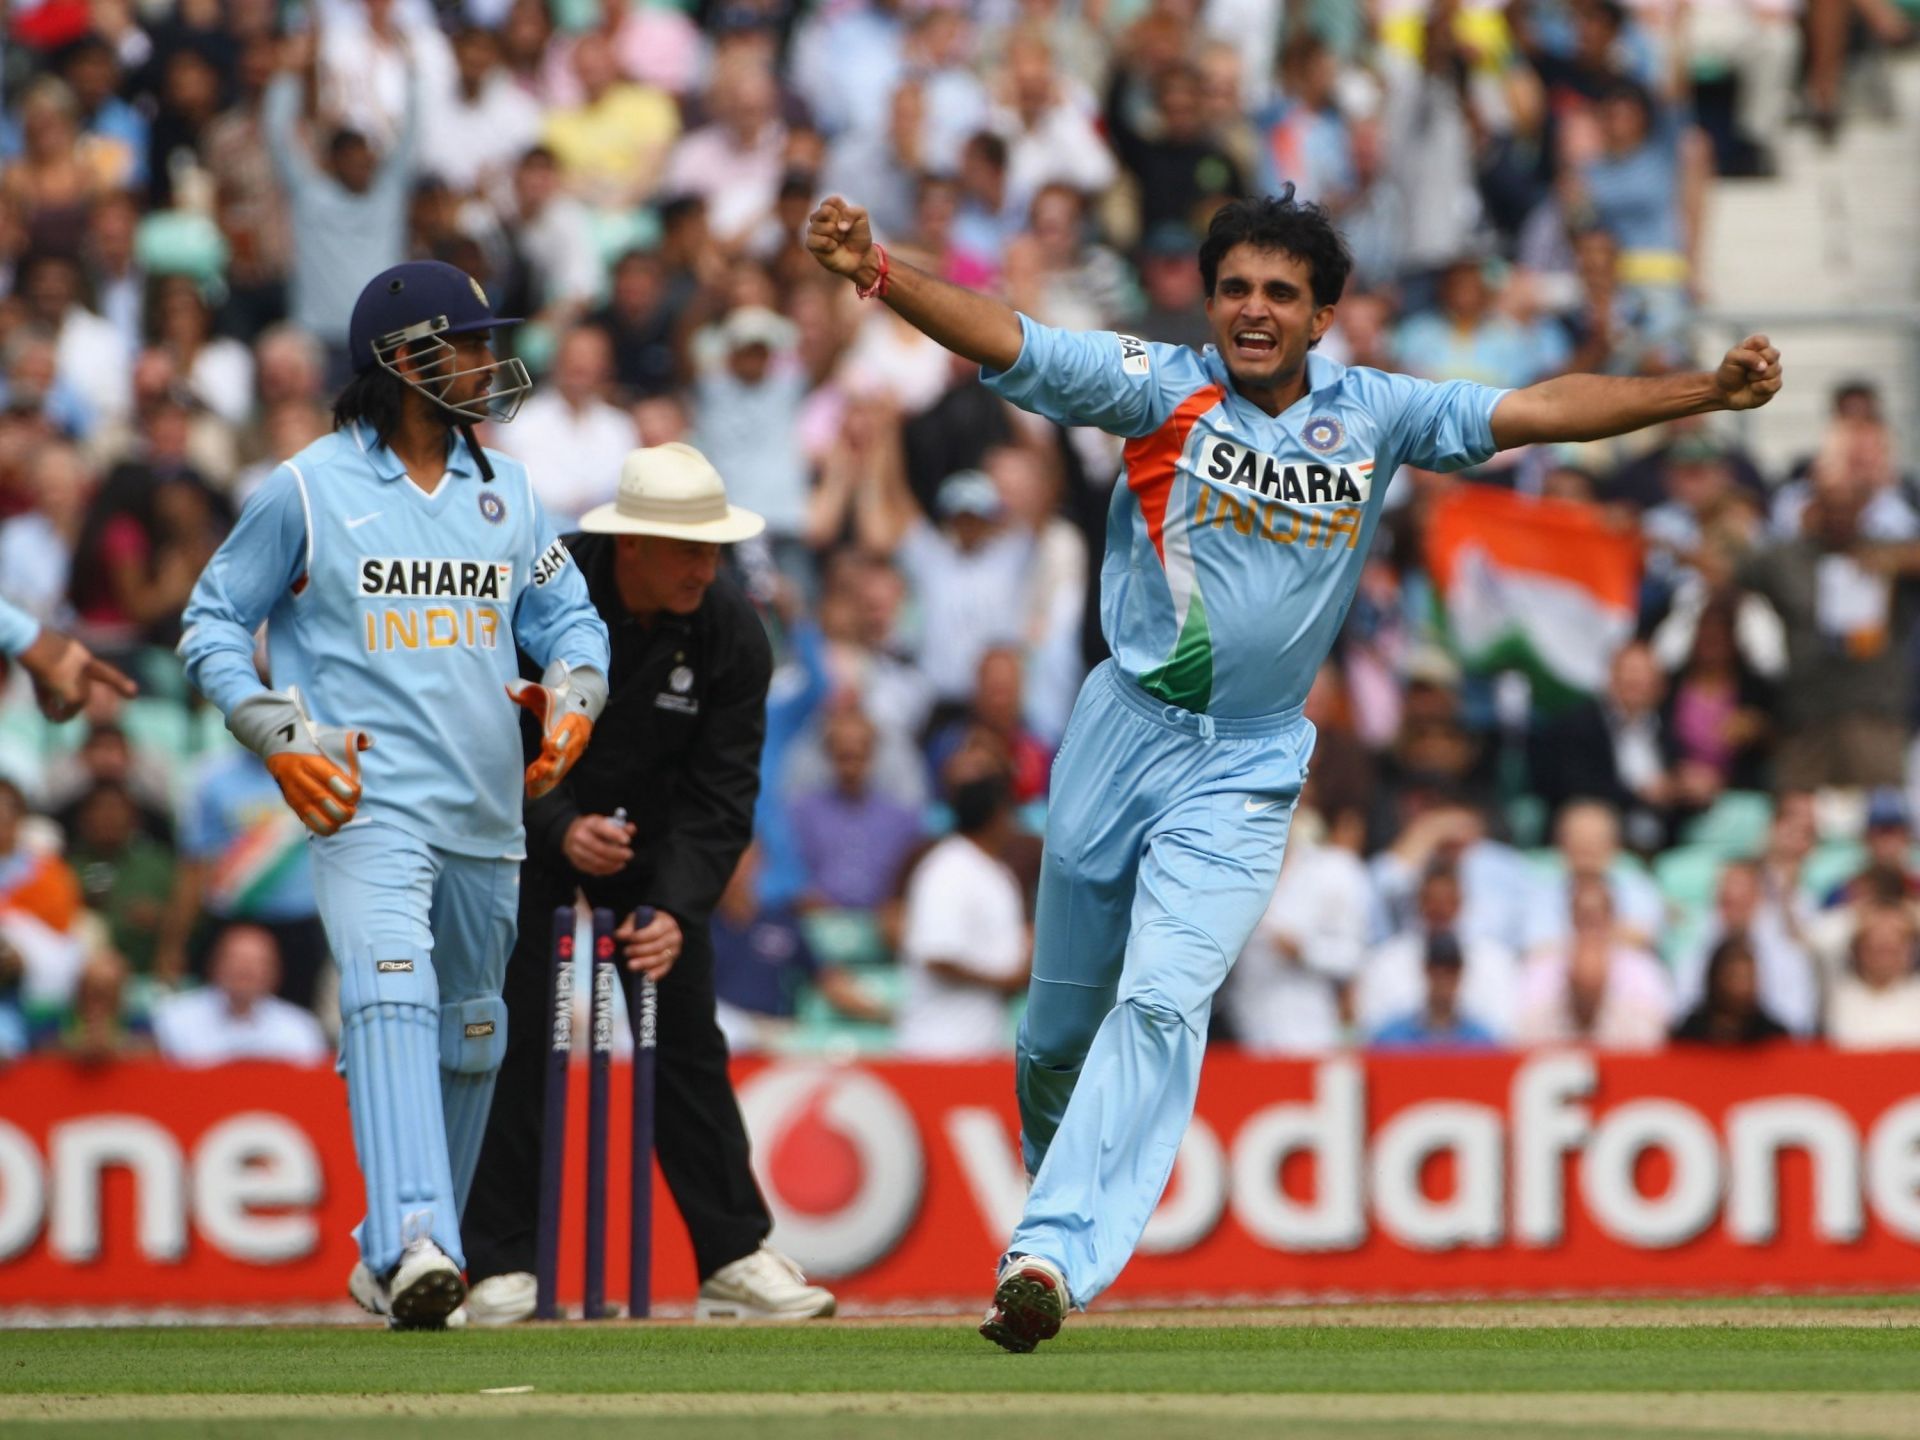 Sourav Ganguly during the 6th NatWest ODI vs England.